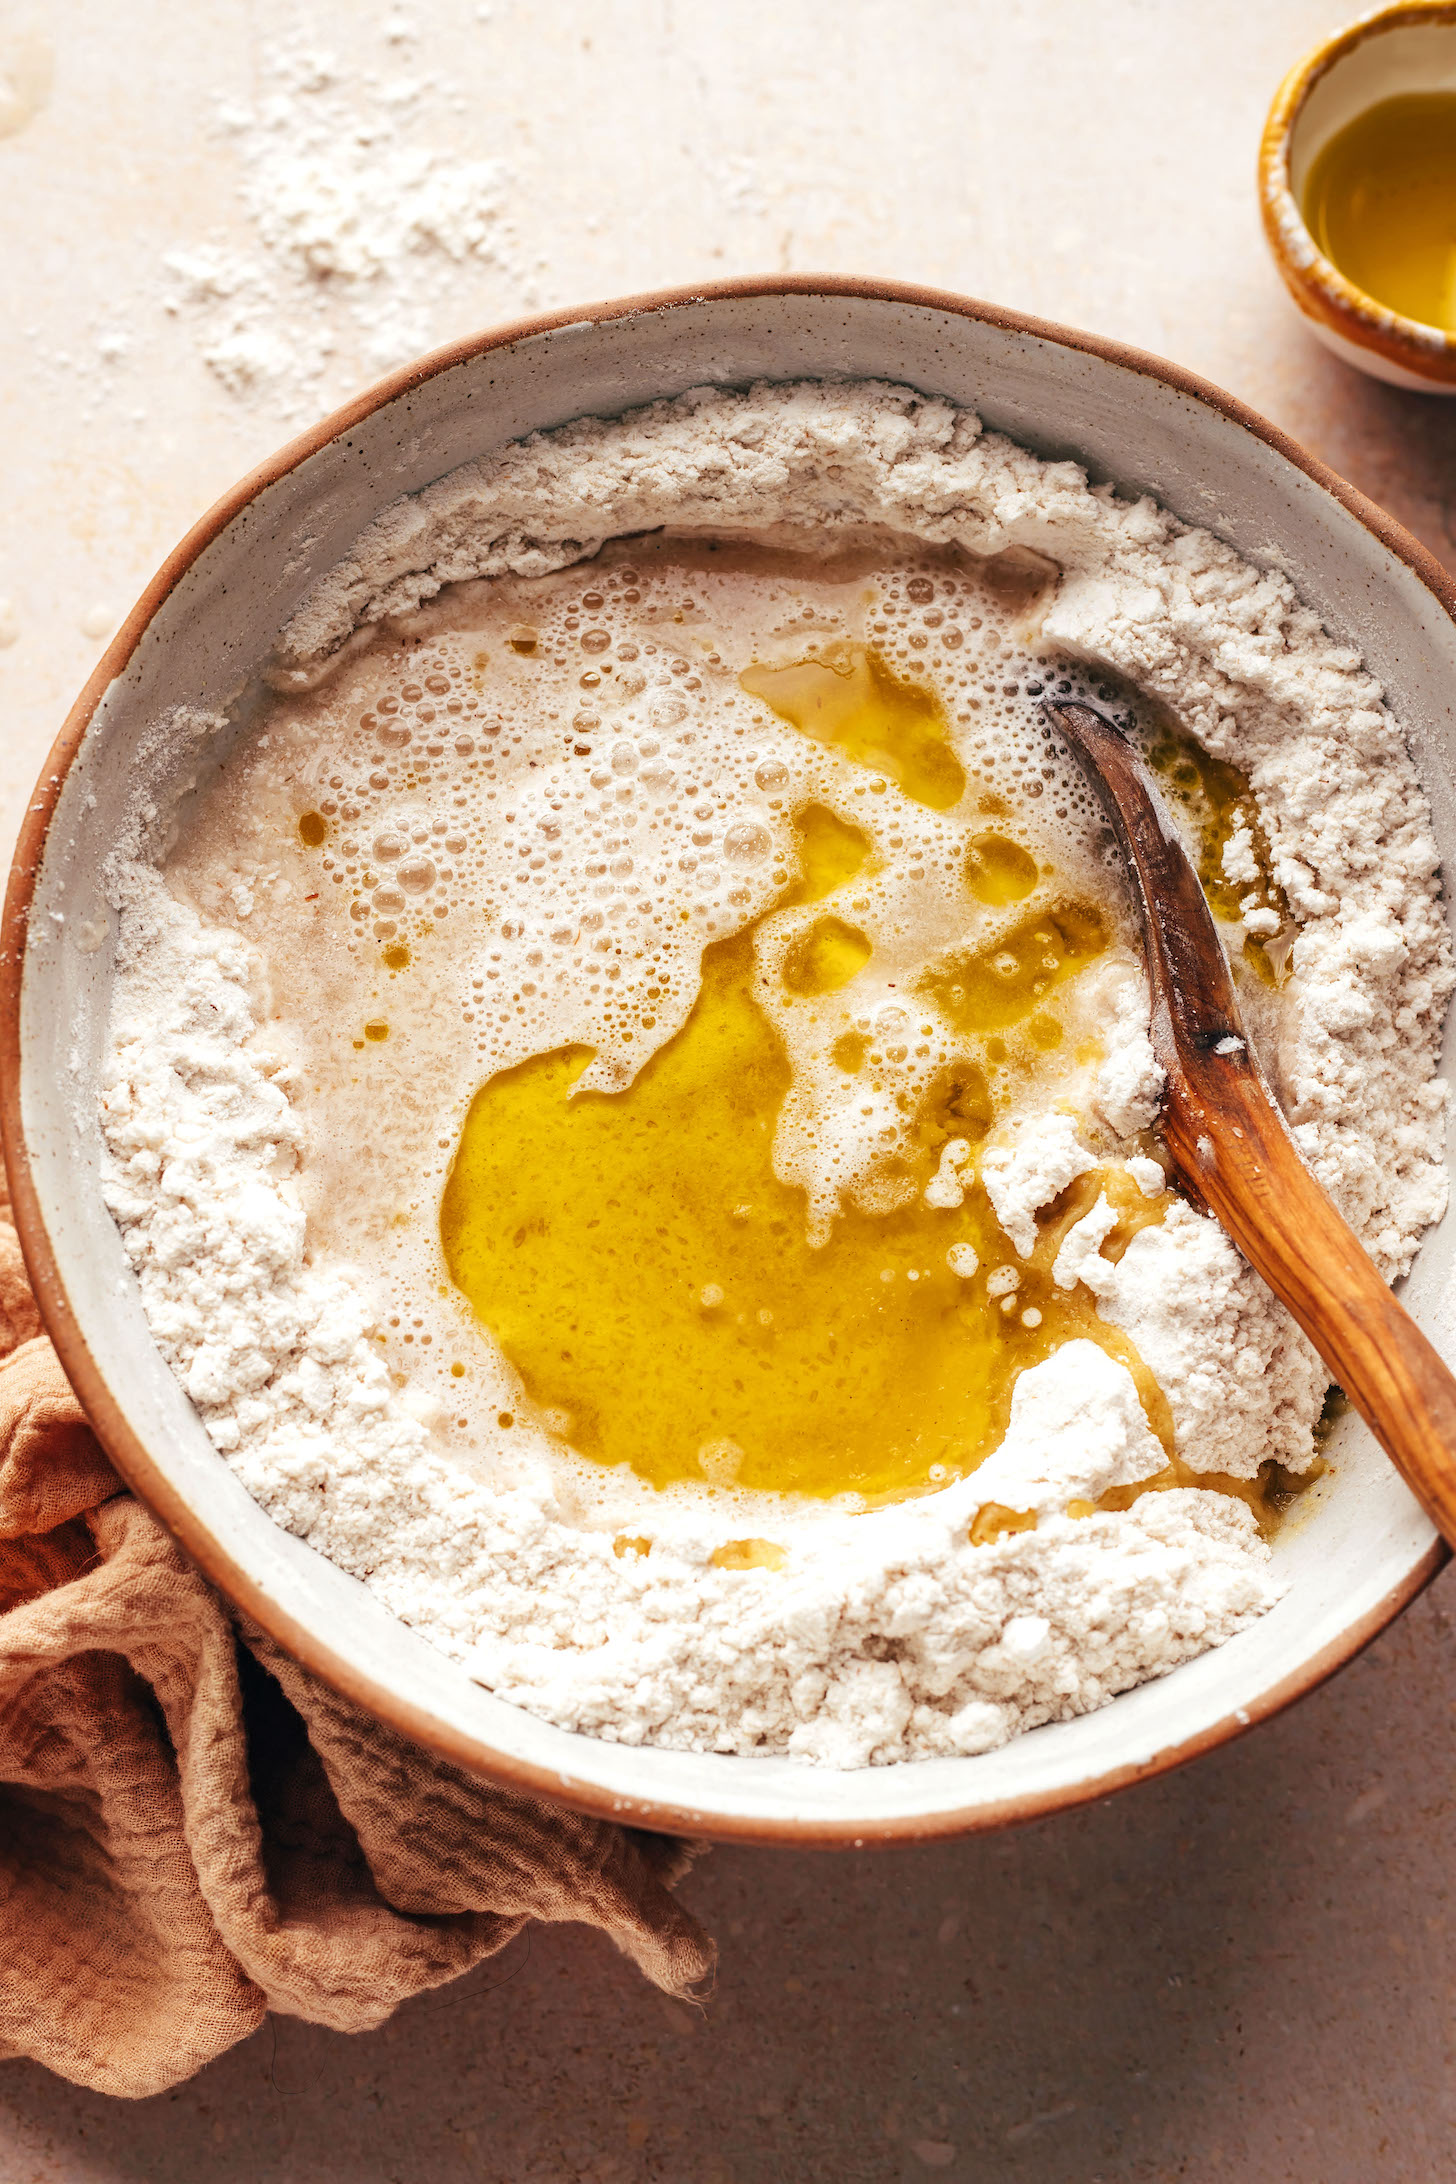 Olive oil and water and yeast mixture in a bowl of gluten-free flours